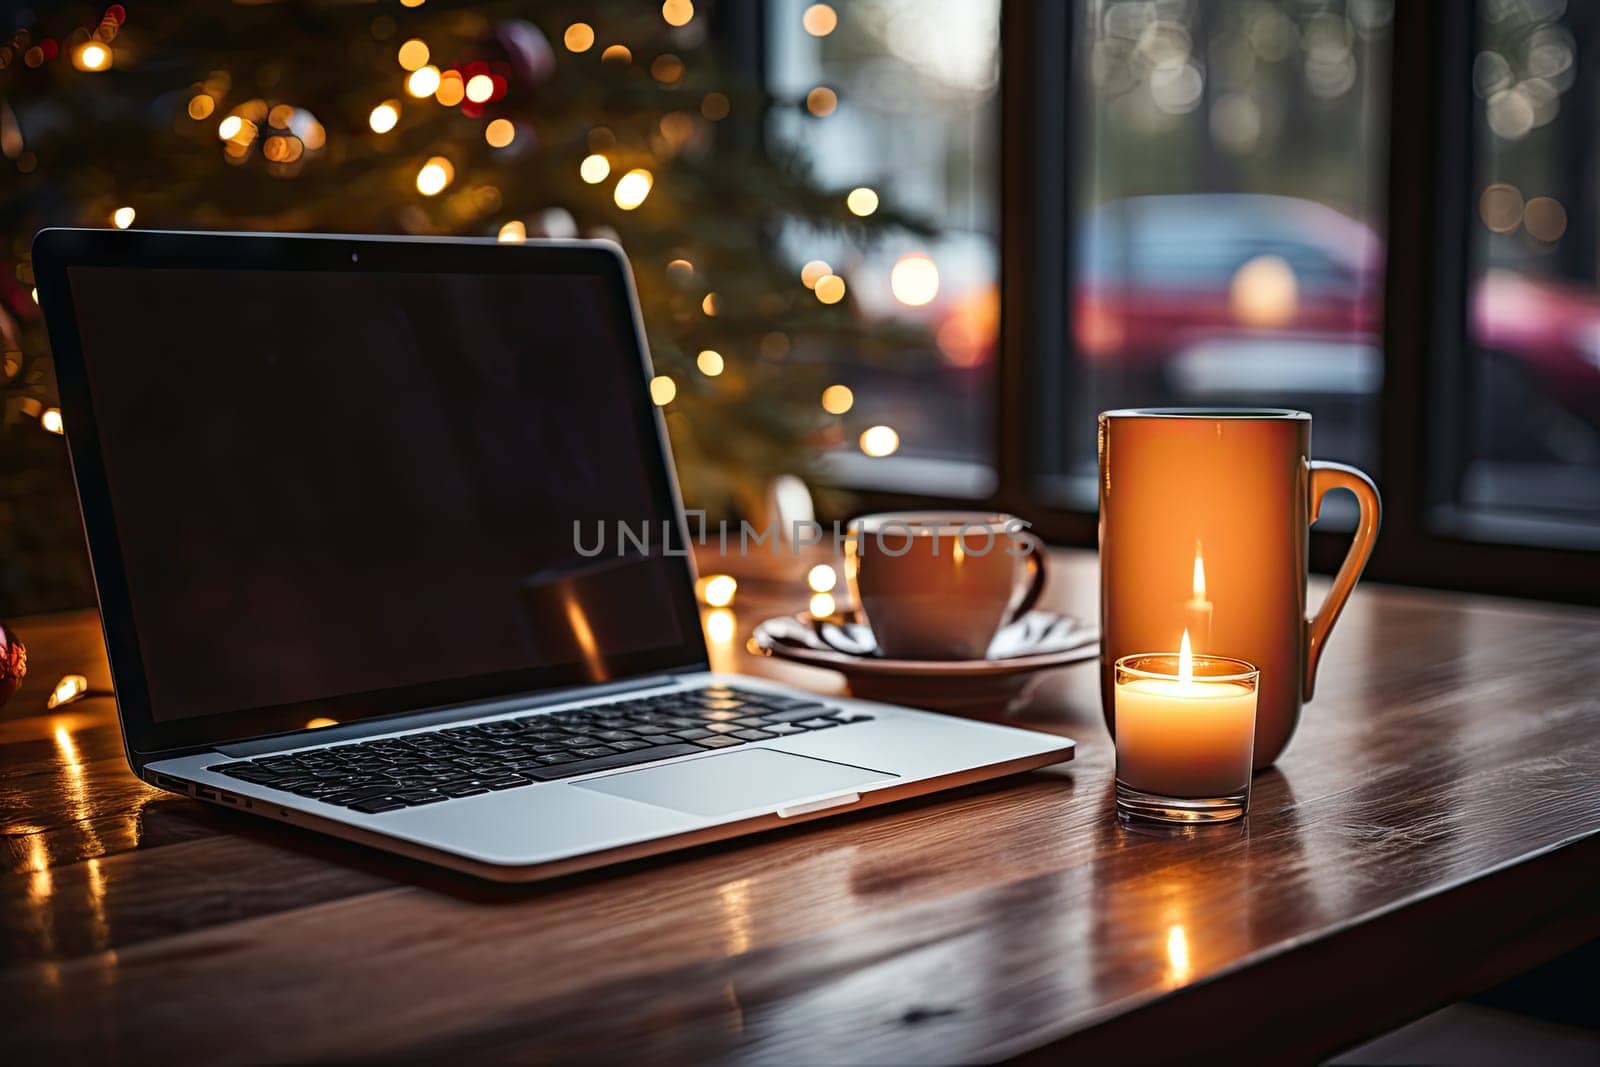 a laptop computer on a desk next to a candle by golibtolibov